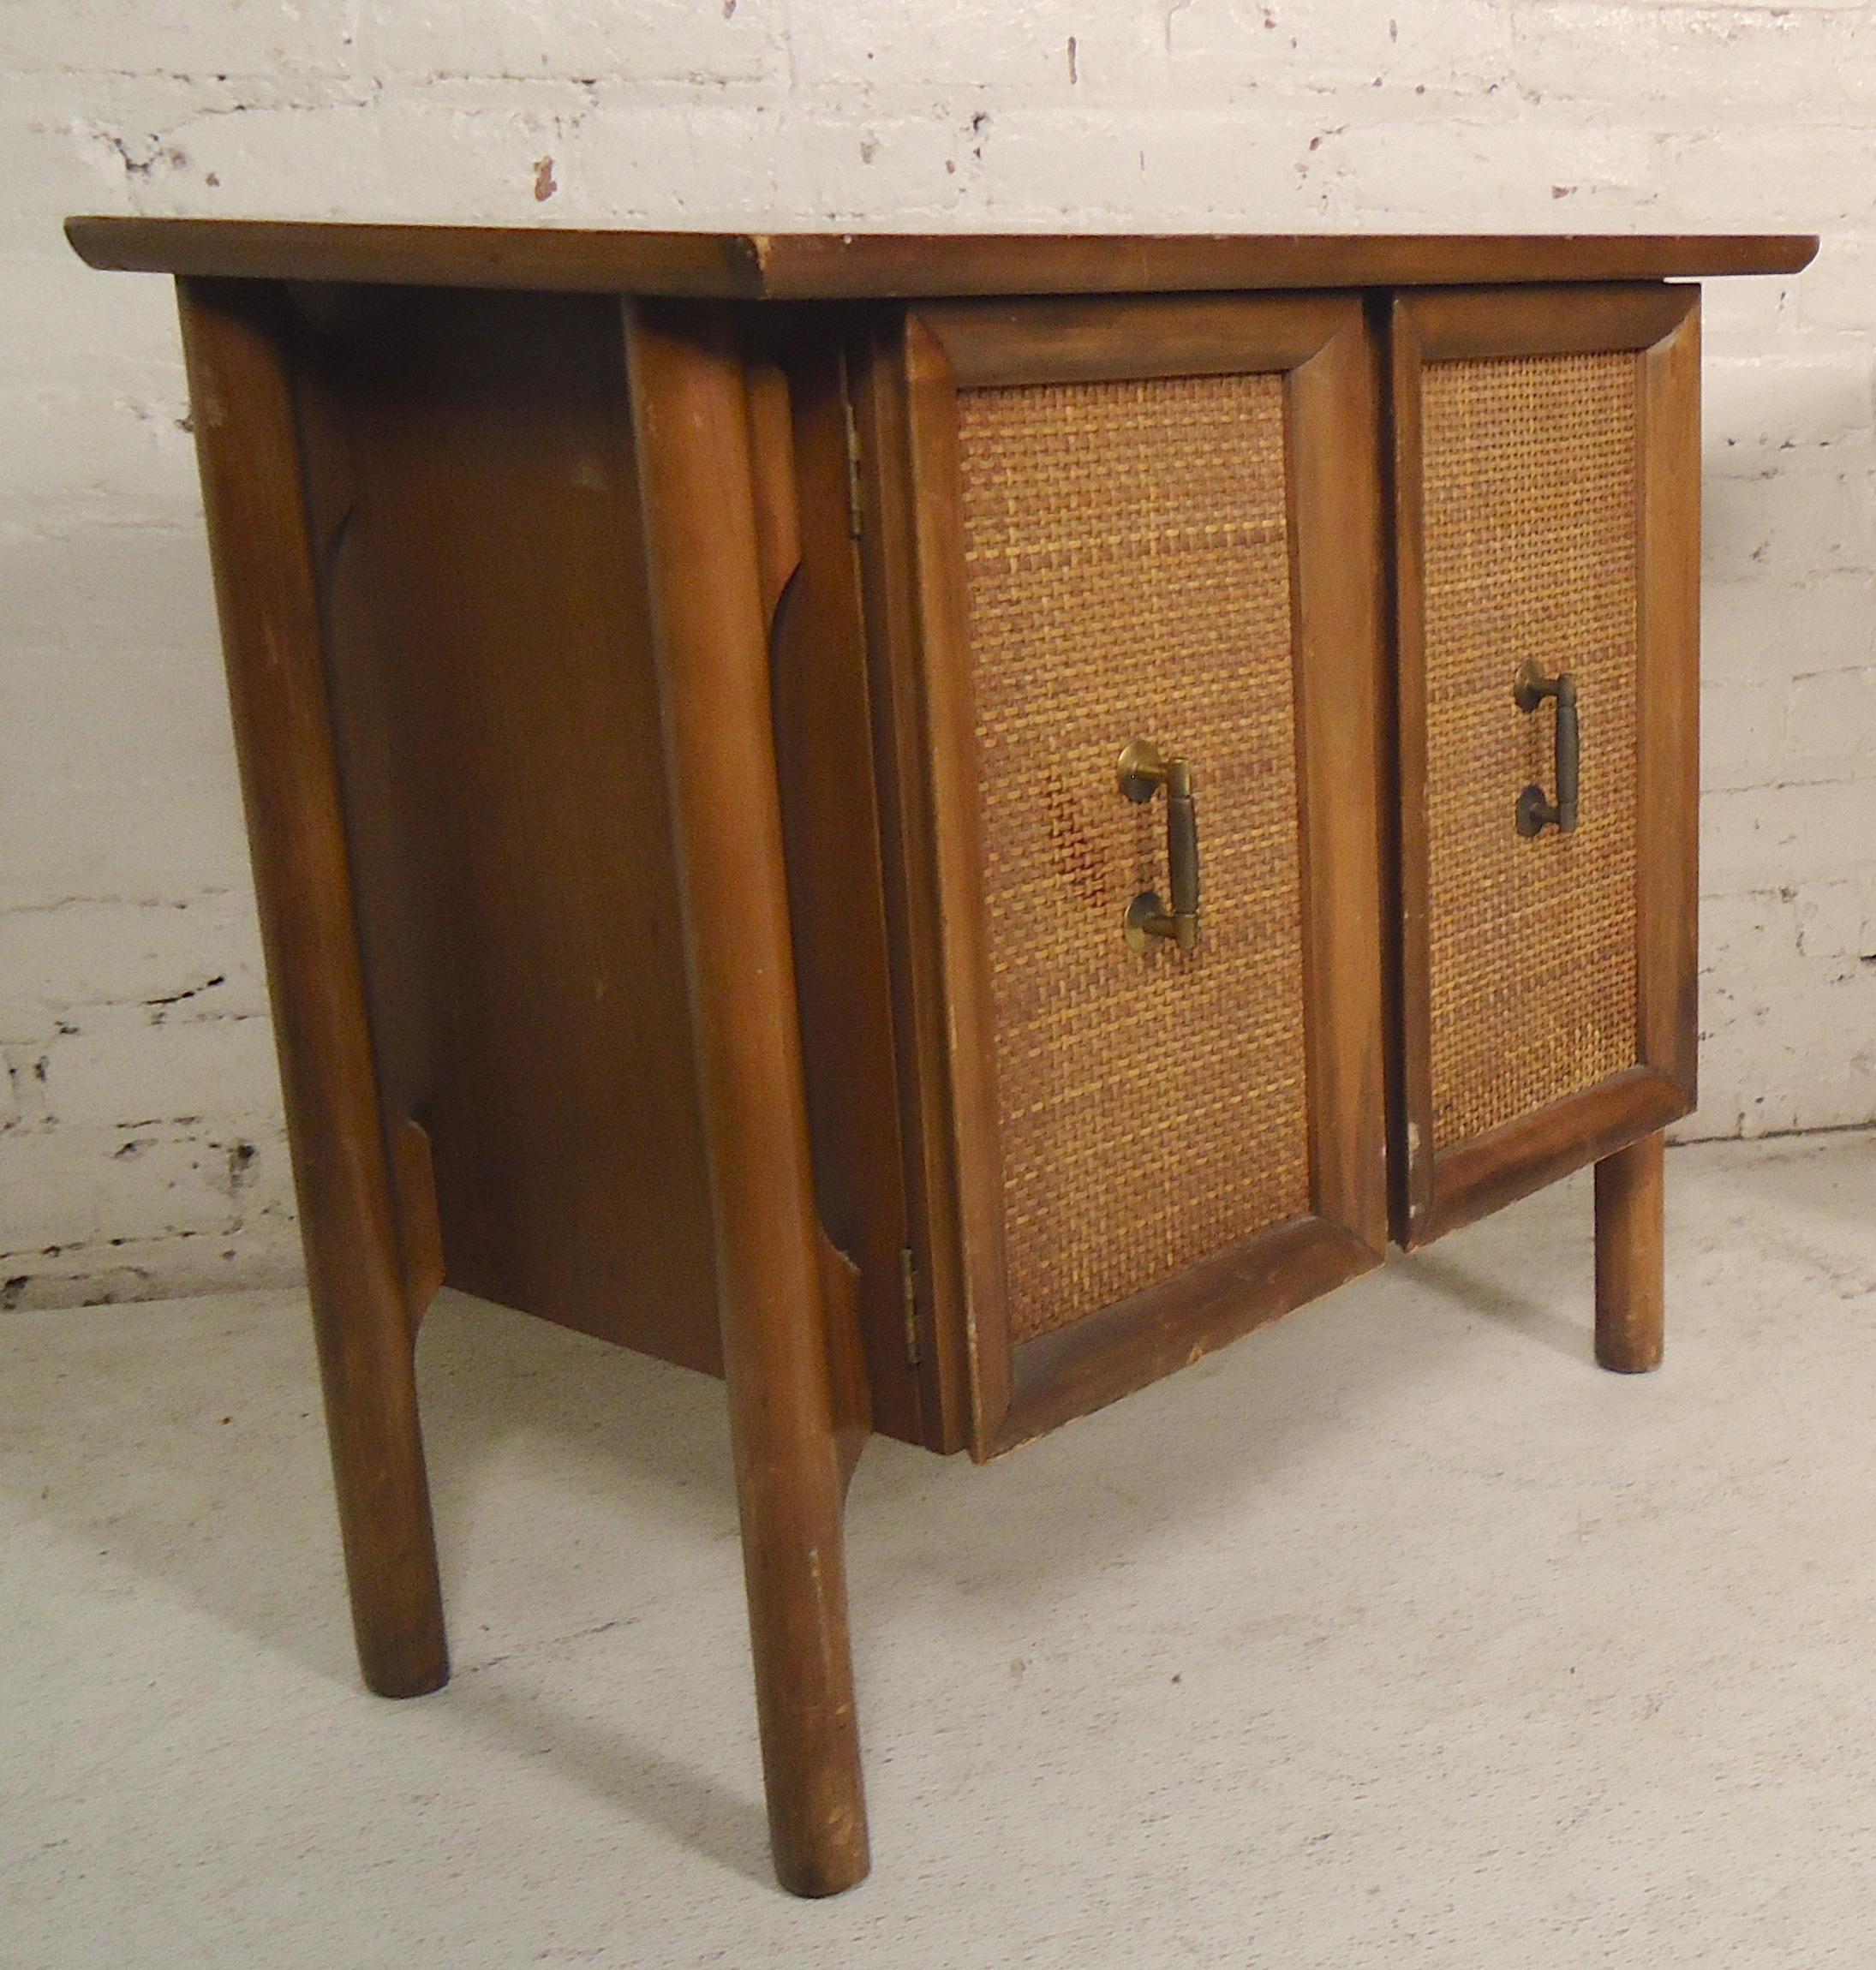 Walnut end tables with wicker front and brass handles. Two door cabinet with shelving holes.

(Please confirm item location - NY or NJ - with dealer).
 